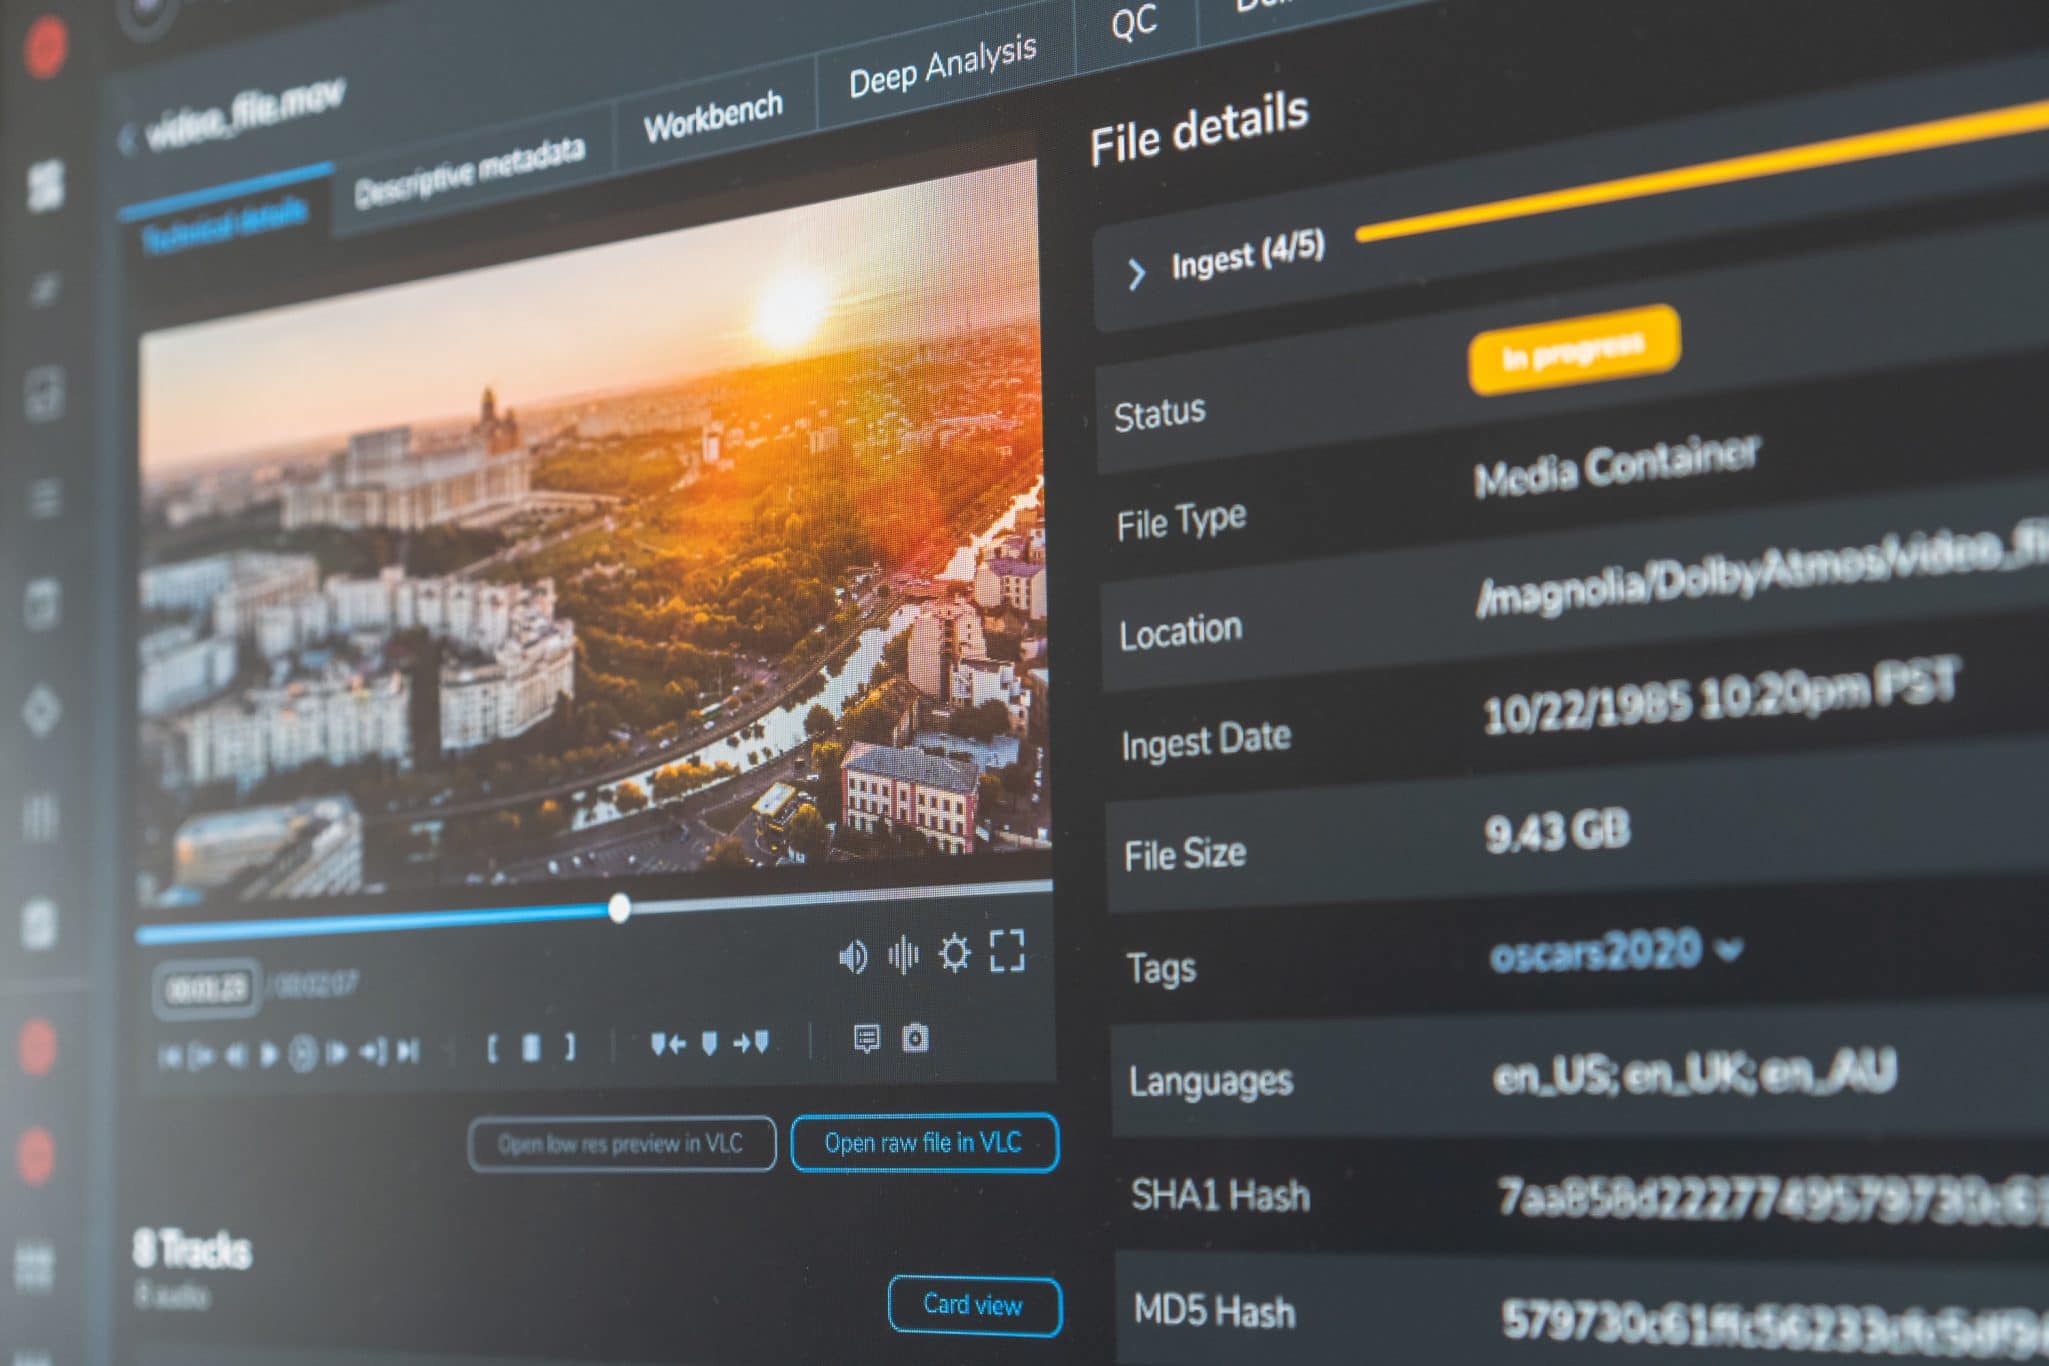 The Ateliere Connect user interface provides deep visibility into all aspects of video content and allows users to easily adapt content for many different streaming experiences scaled